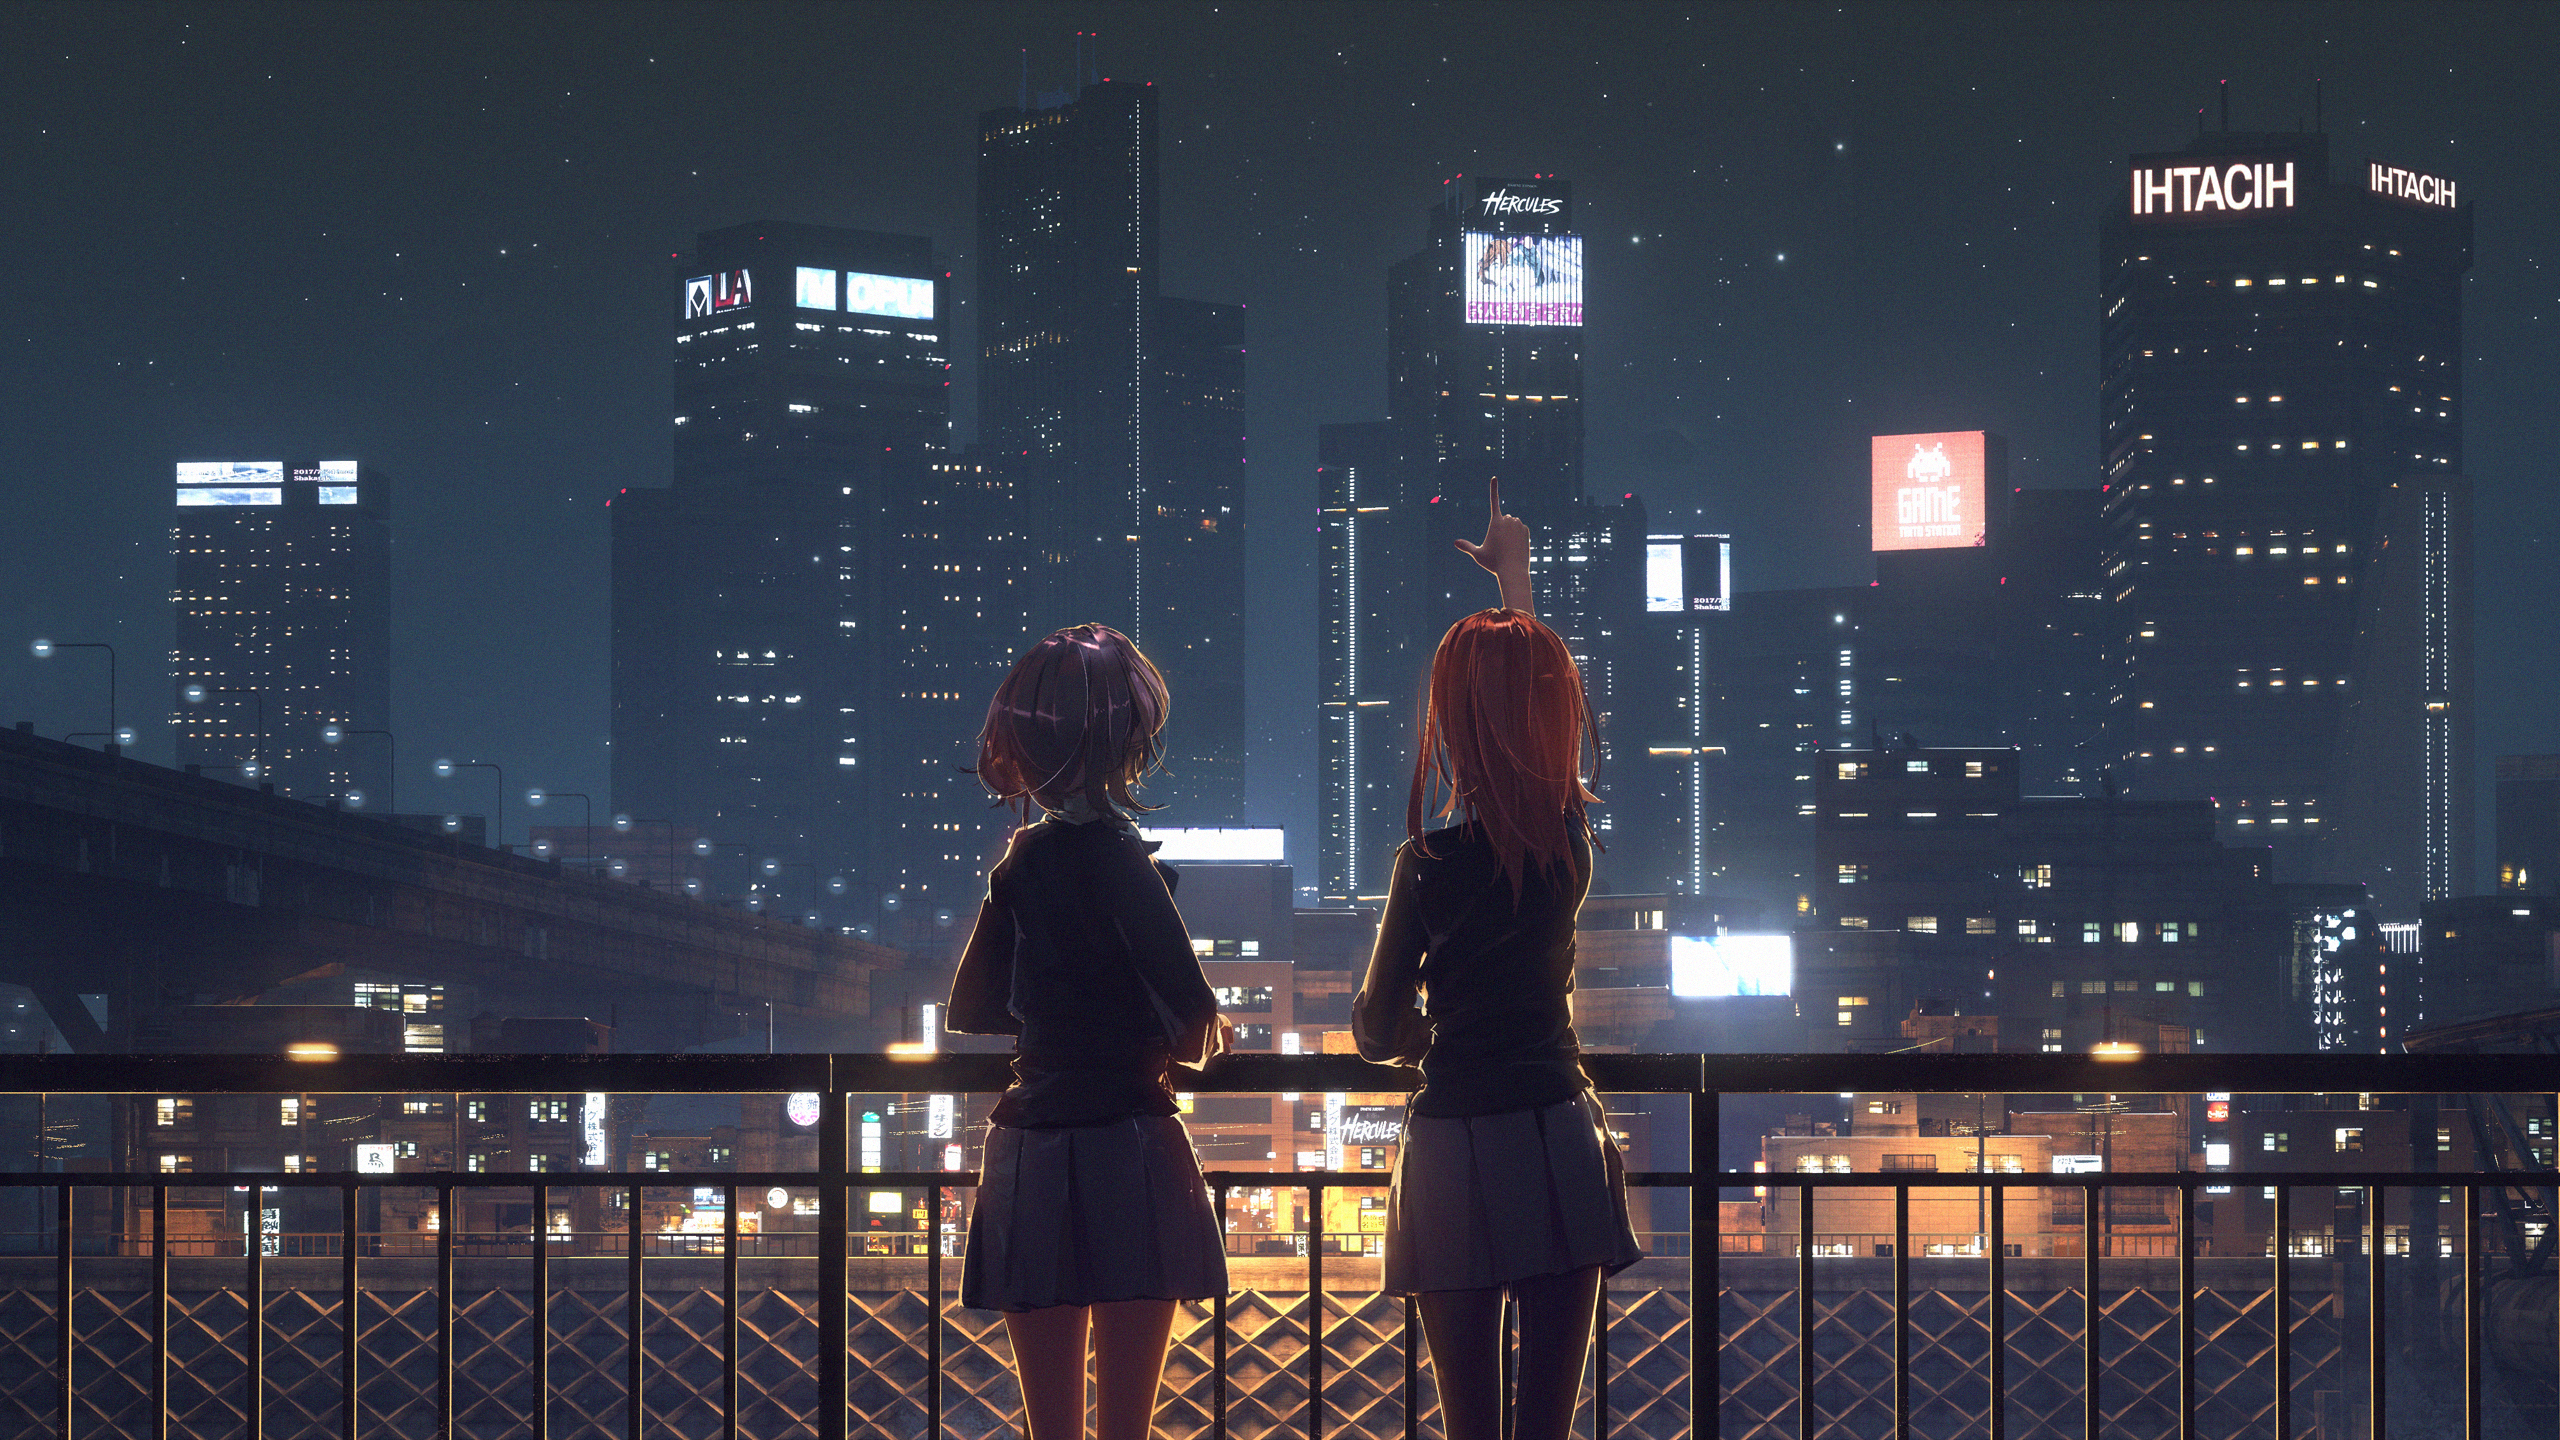 4k Anime City Night Wallpapers - Wallpaper Cave